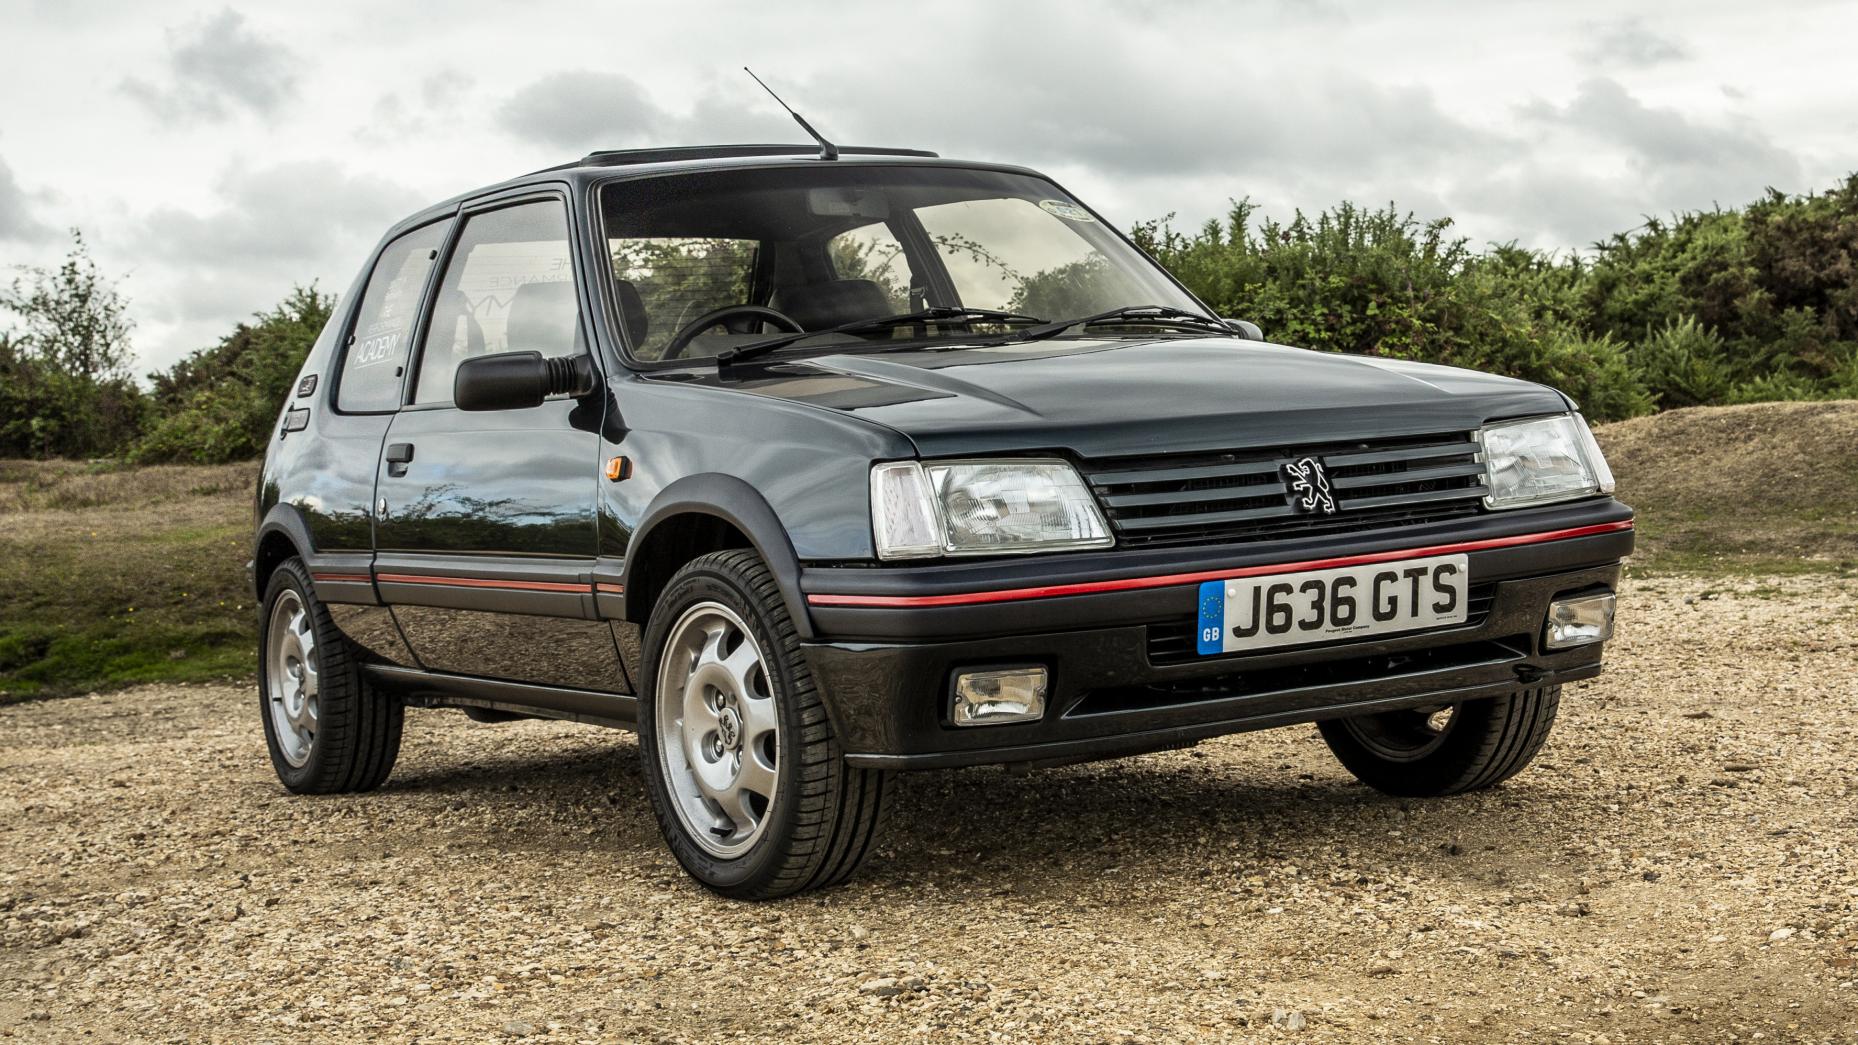 TopGear The 11 best hot hatches of all time